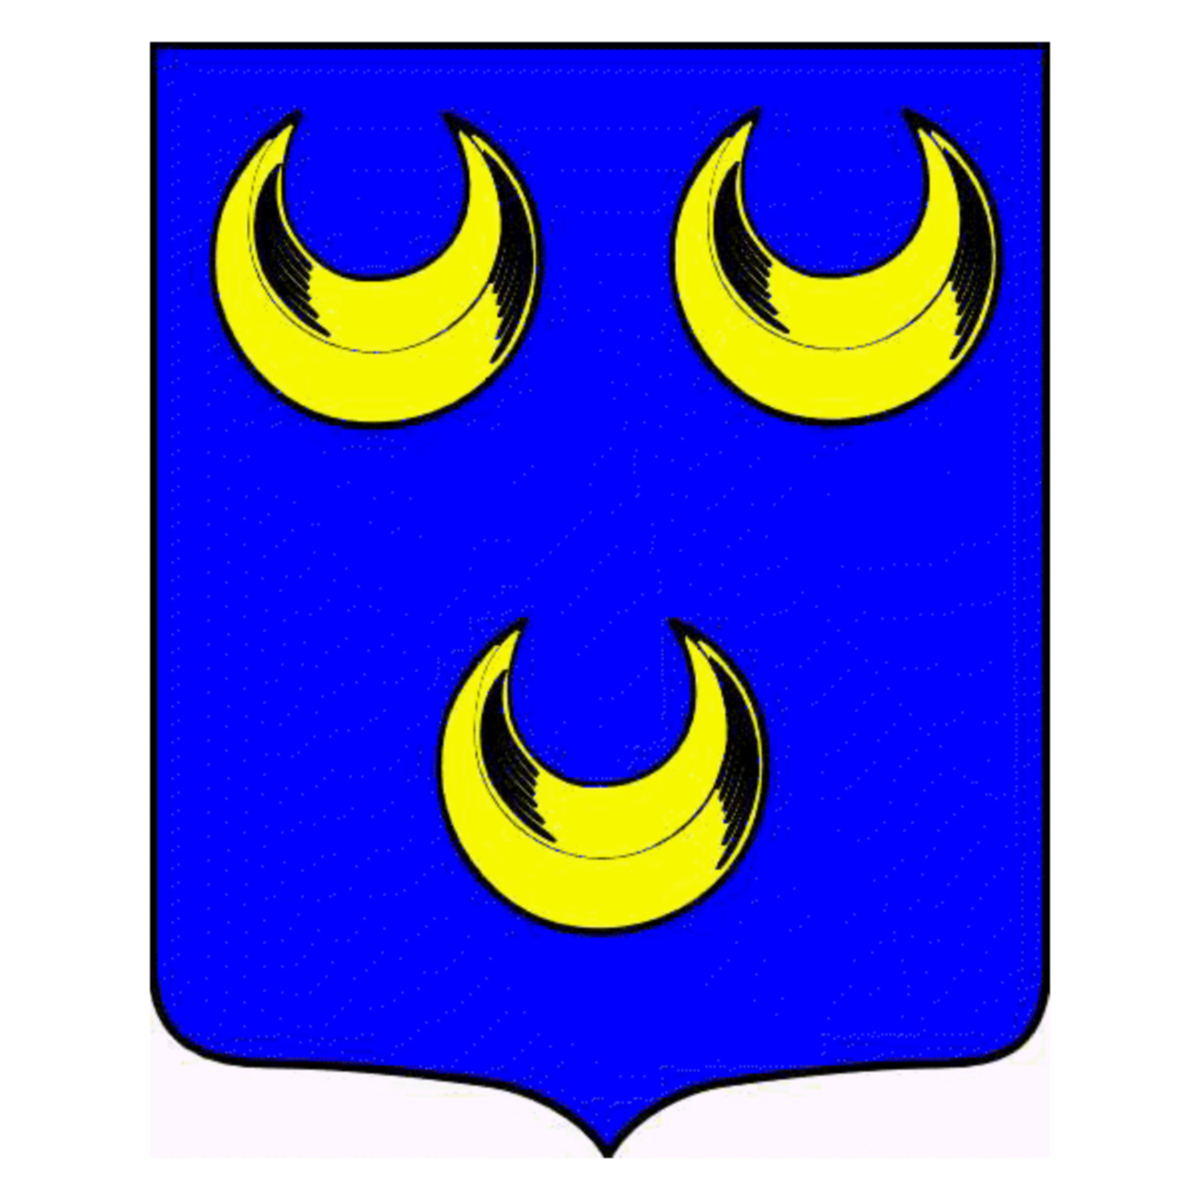 Coat of arms of family Mora